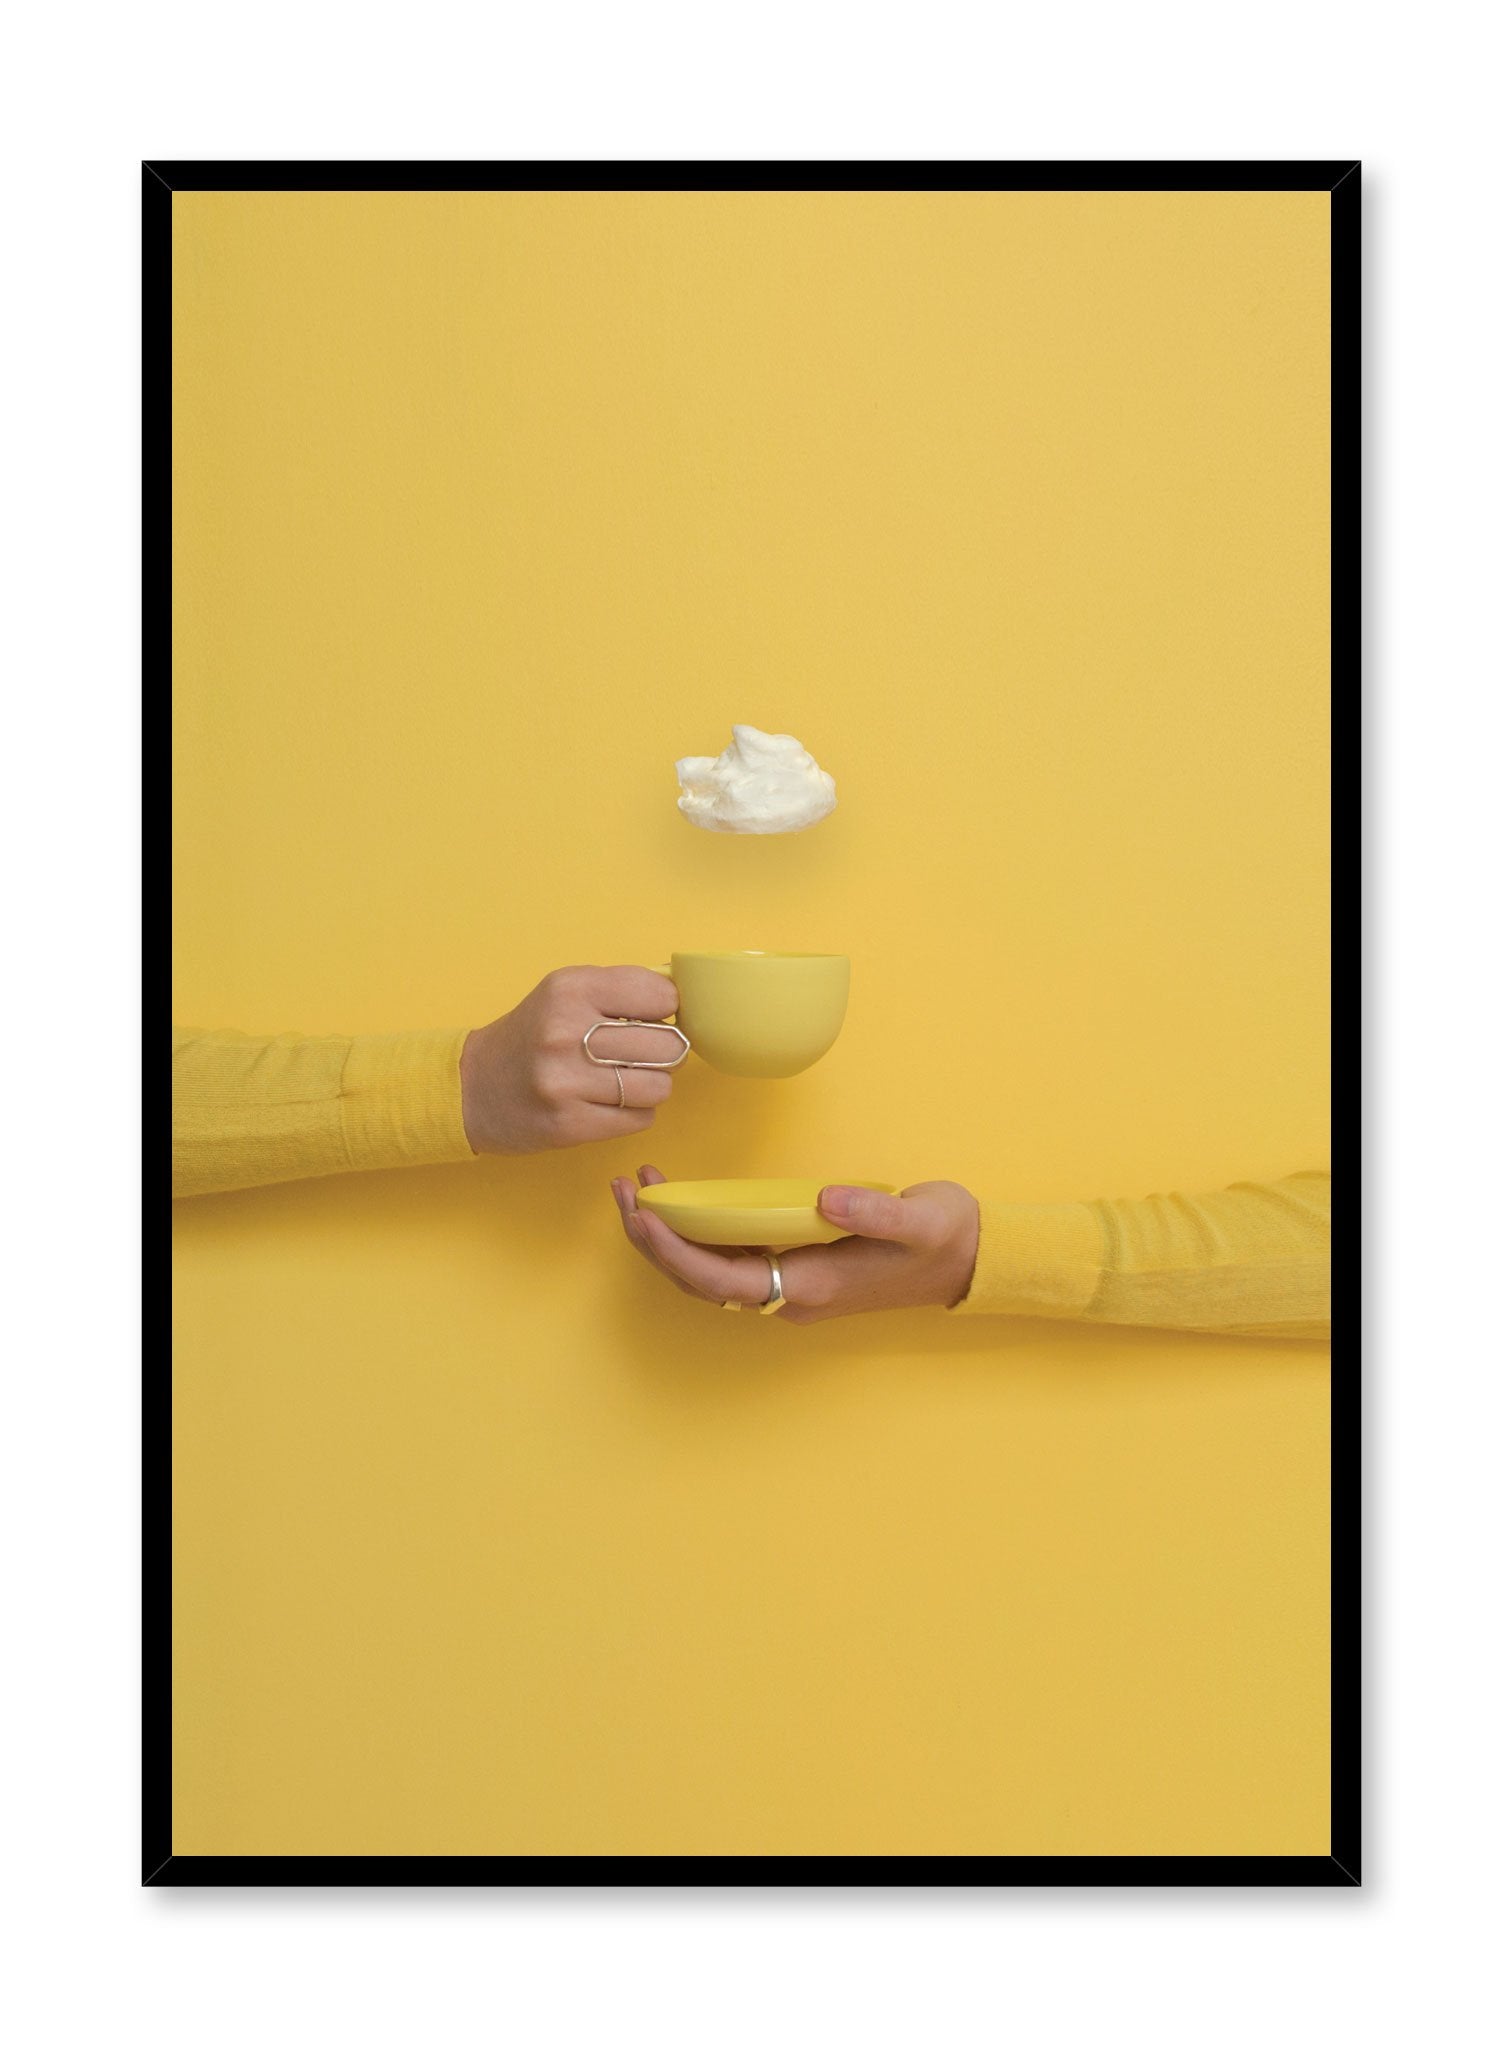 Minimalist design poster by Opposite Wall yellowillow Touch of Cloud